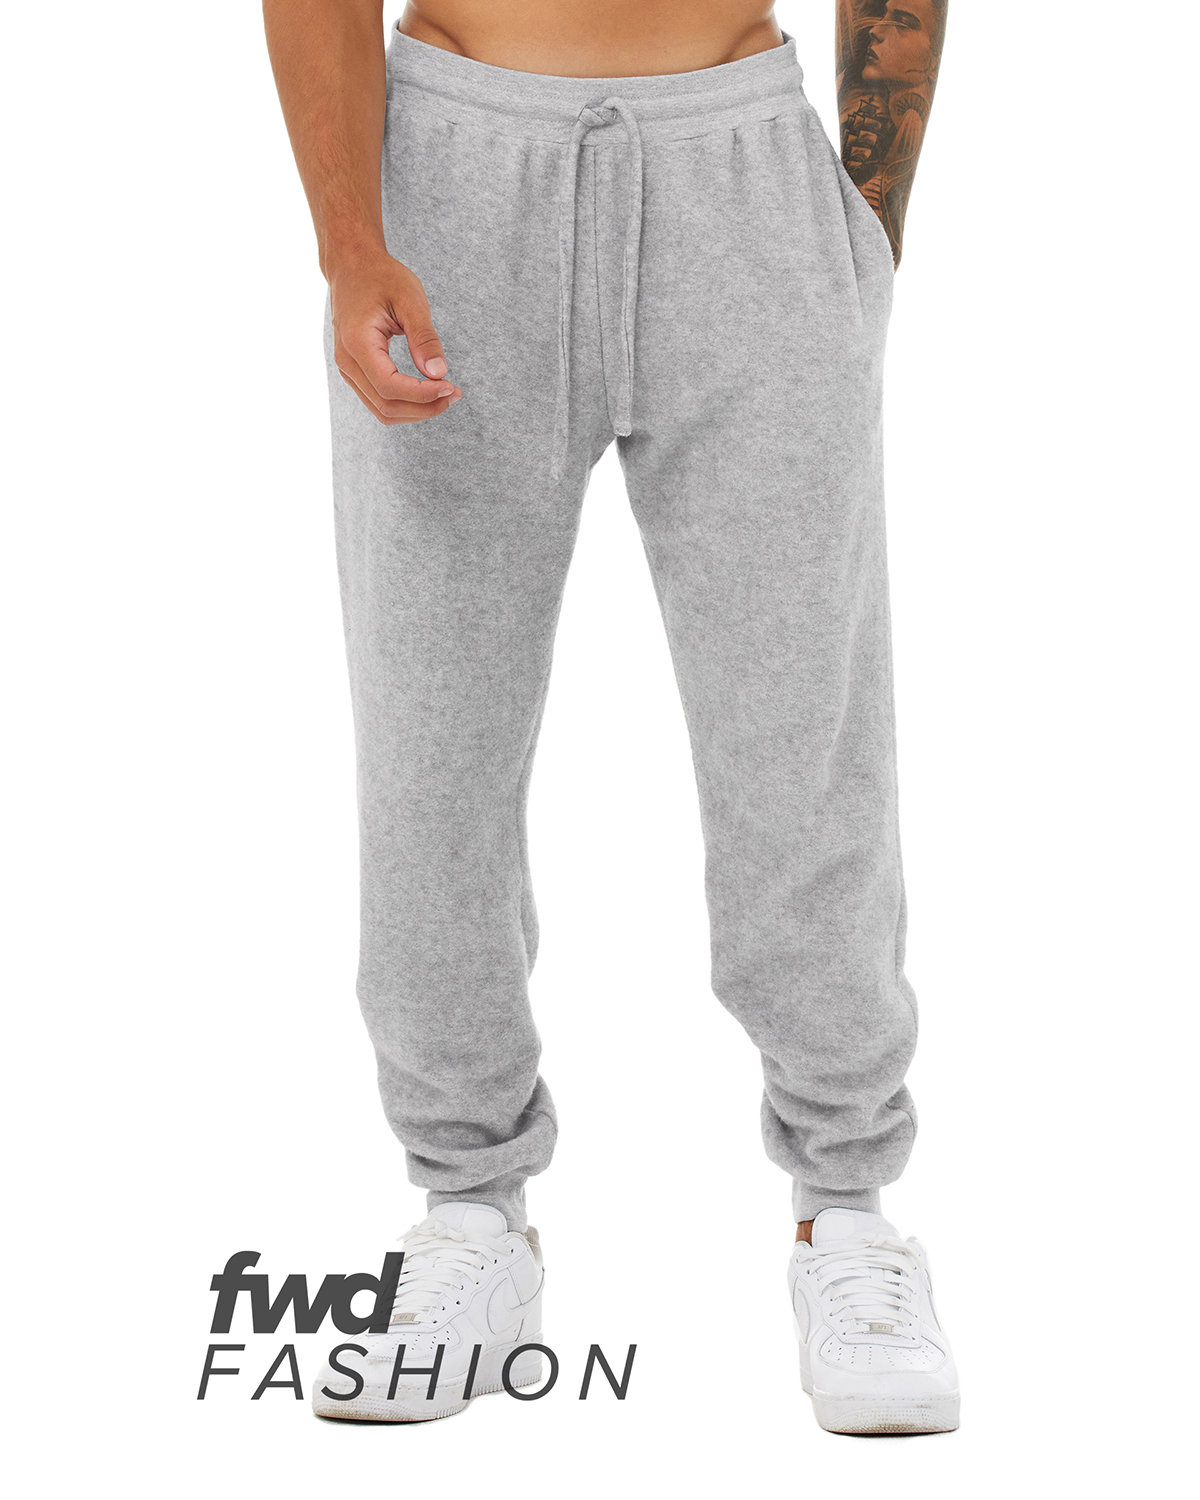 Bella + Canvas FWD Fashion Unisex Sueded Fleece Jogger Pant ATHLETIC HEATHER 